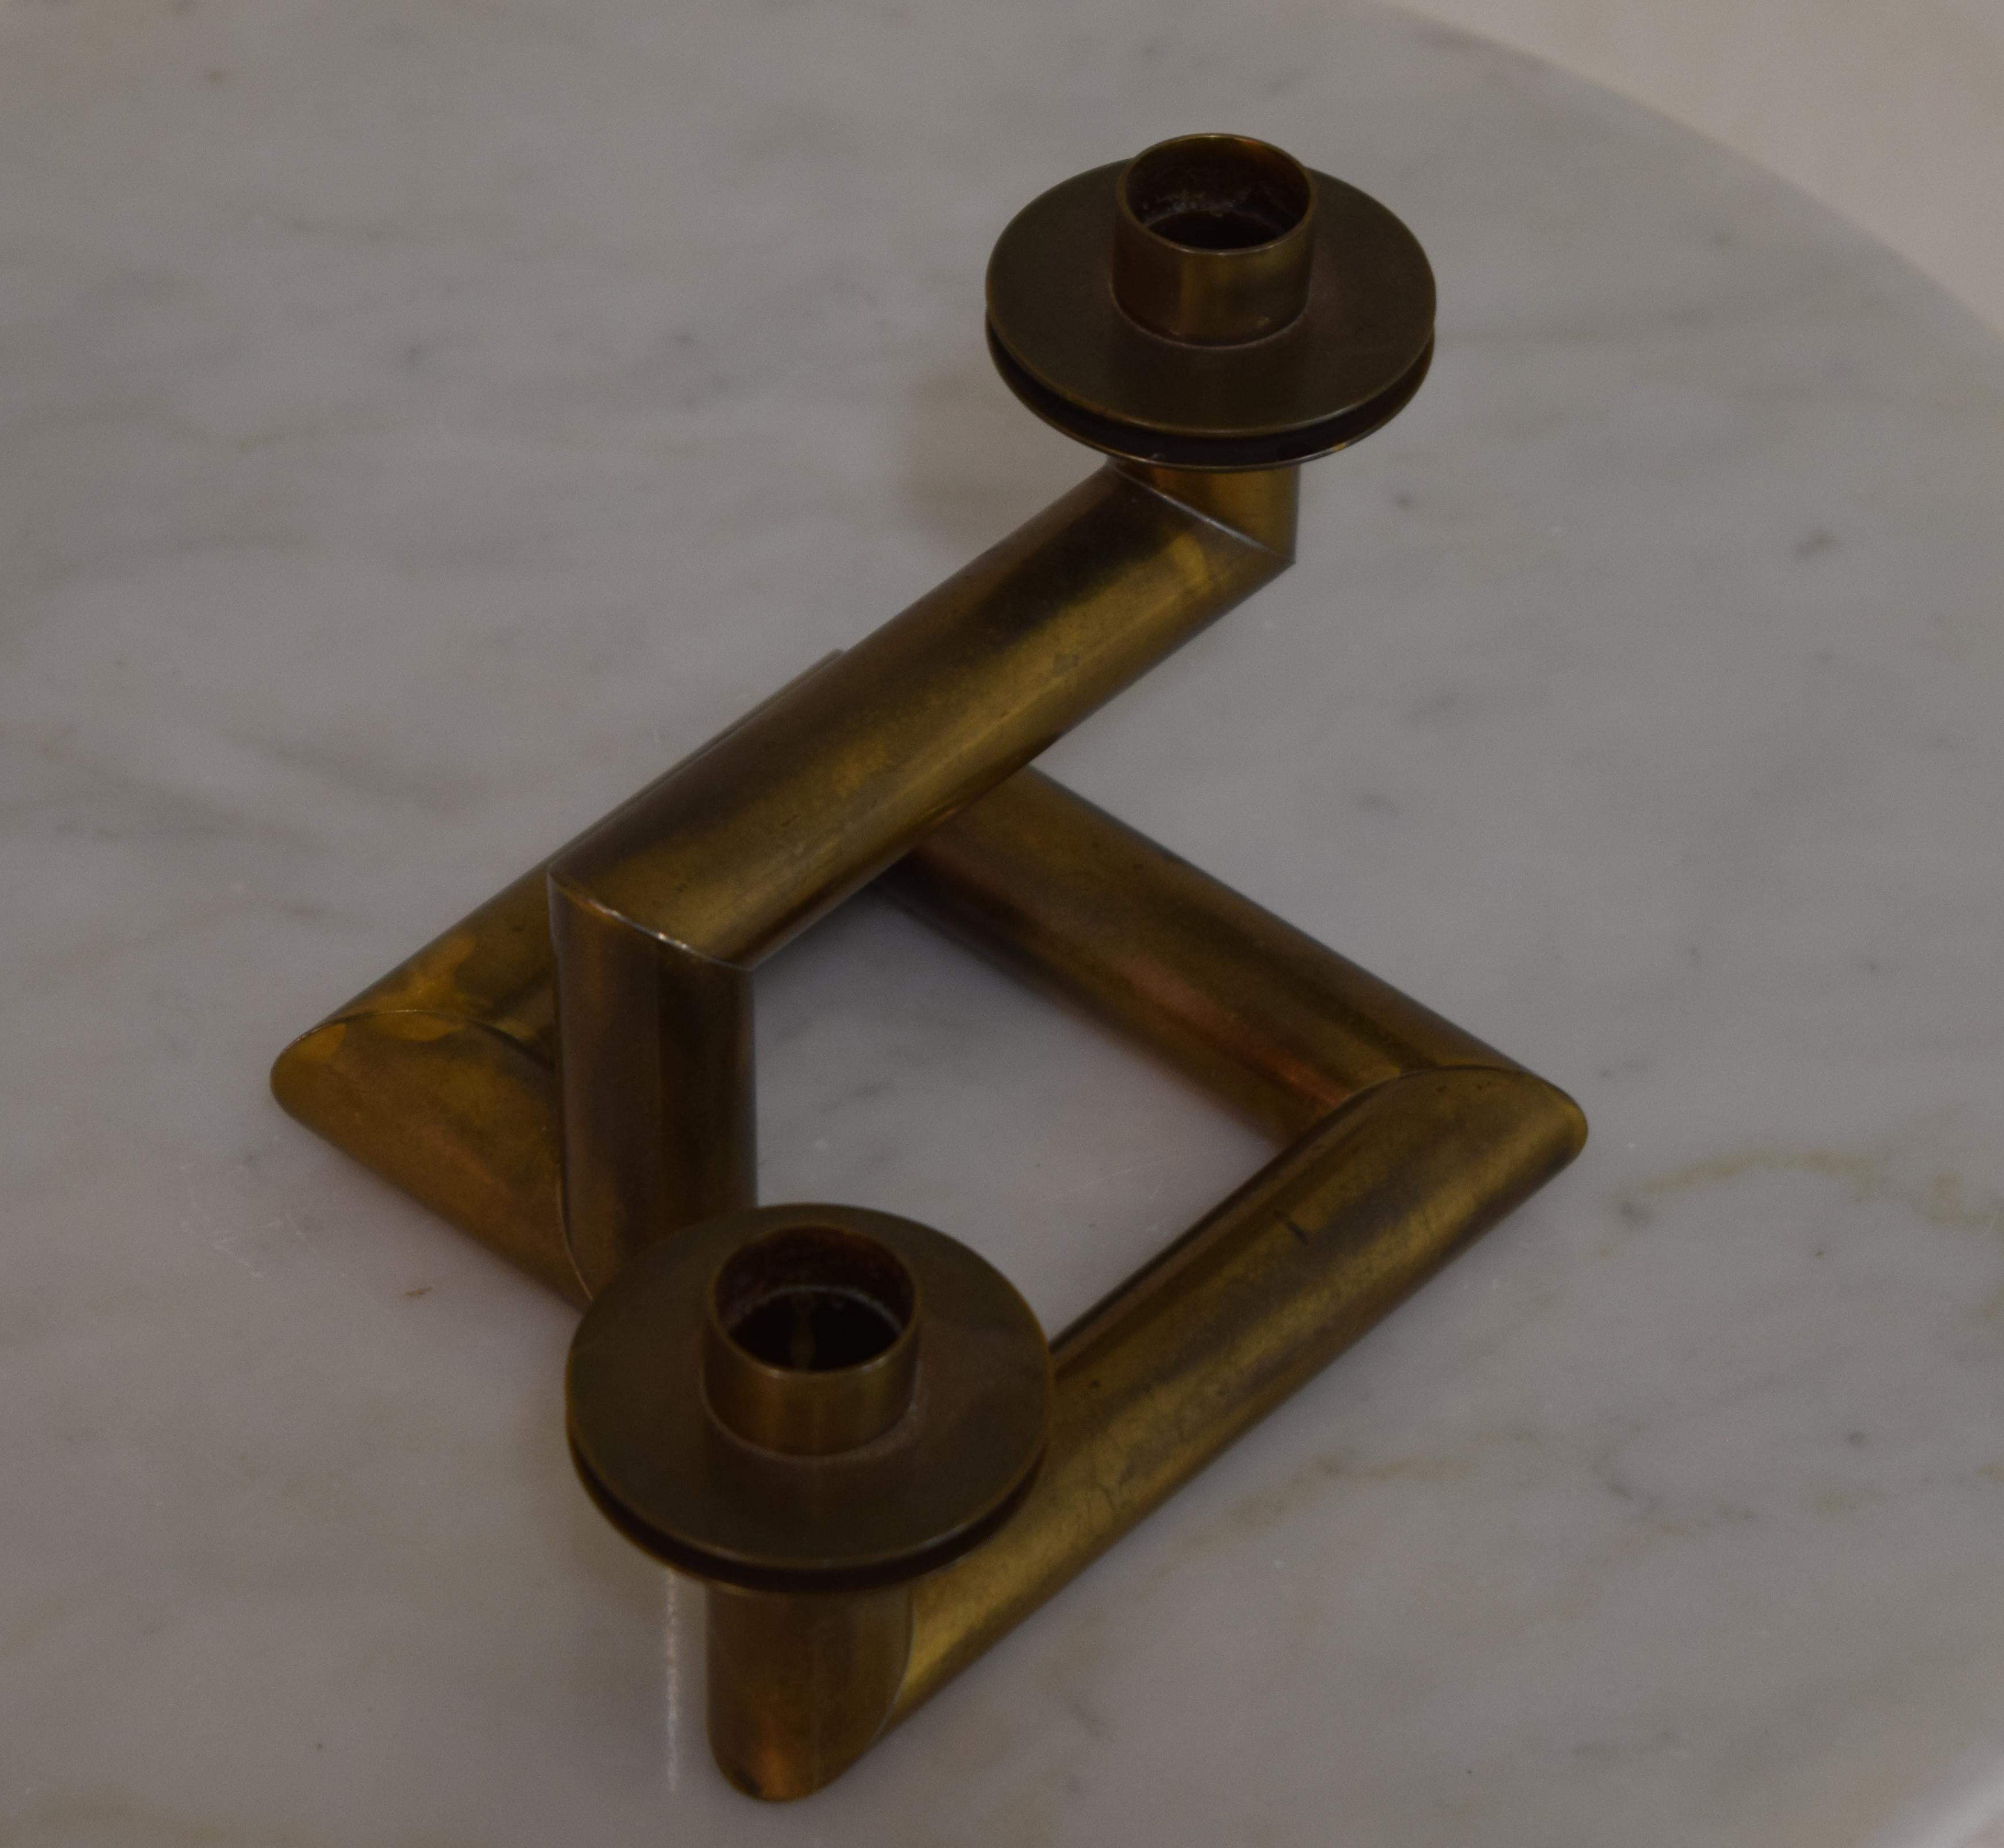 Geometric Art Deco Candle Holder In Excellent Condition For Sale In South Charleston, WV